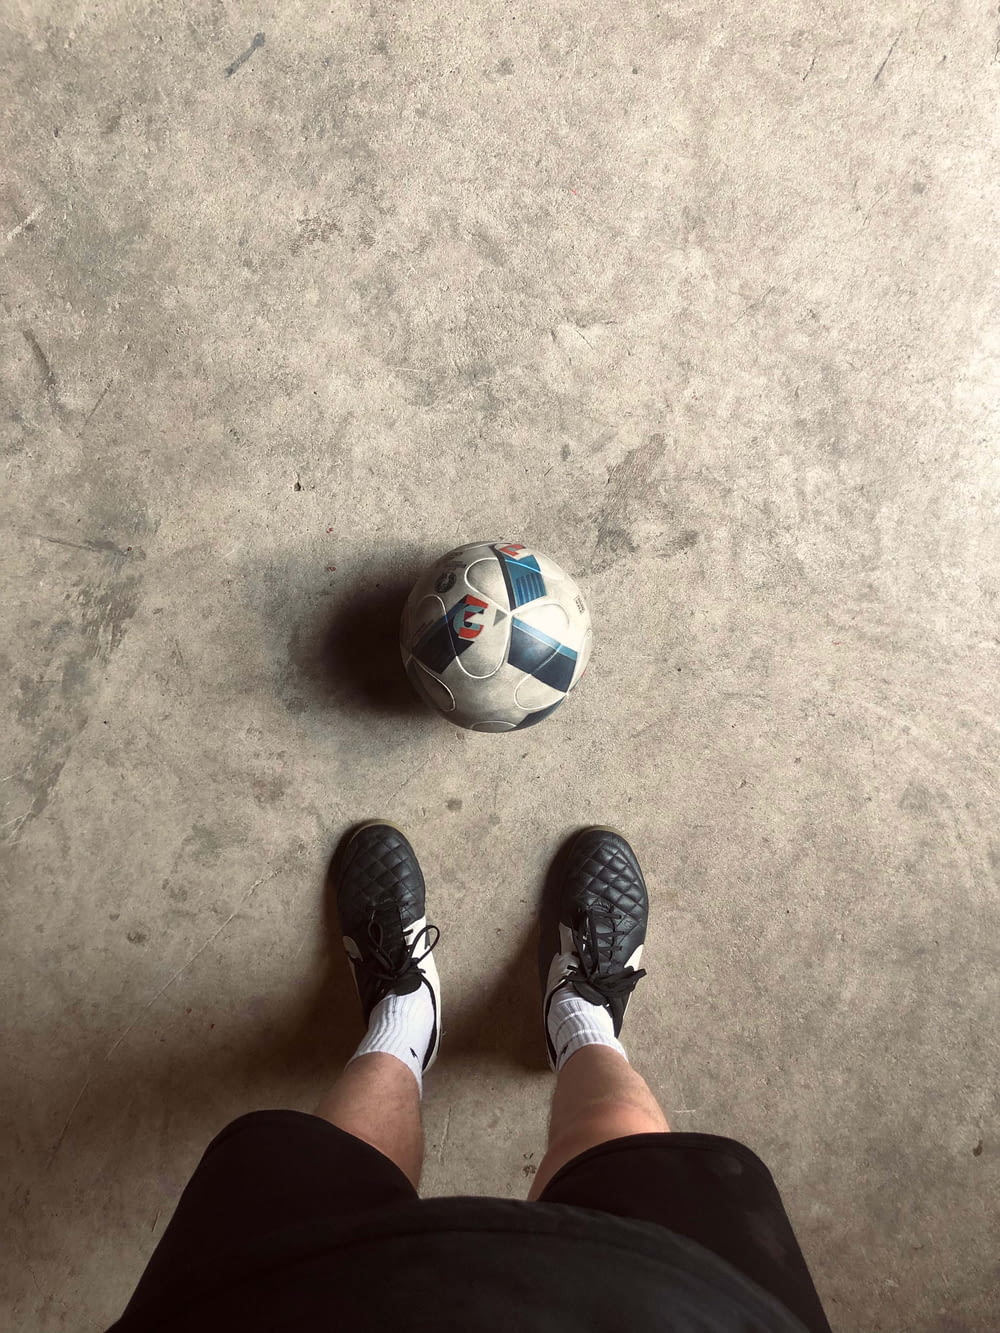 a person standing in front of a soccer ball